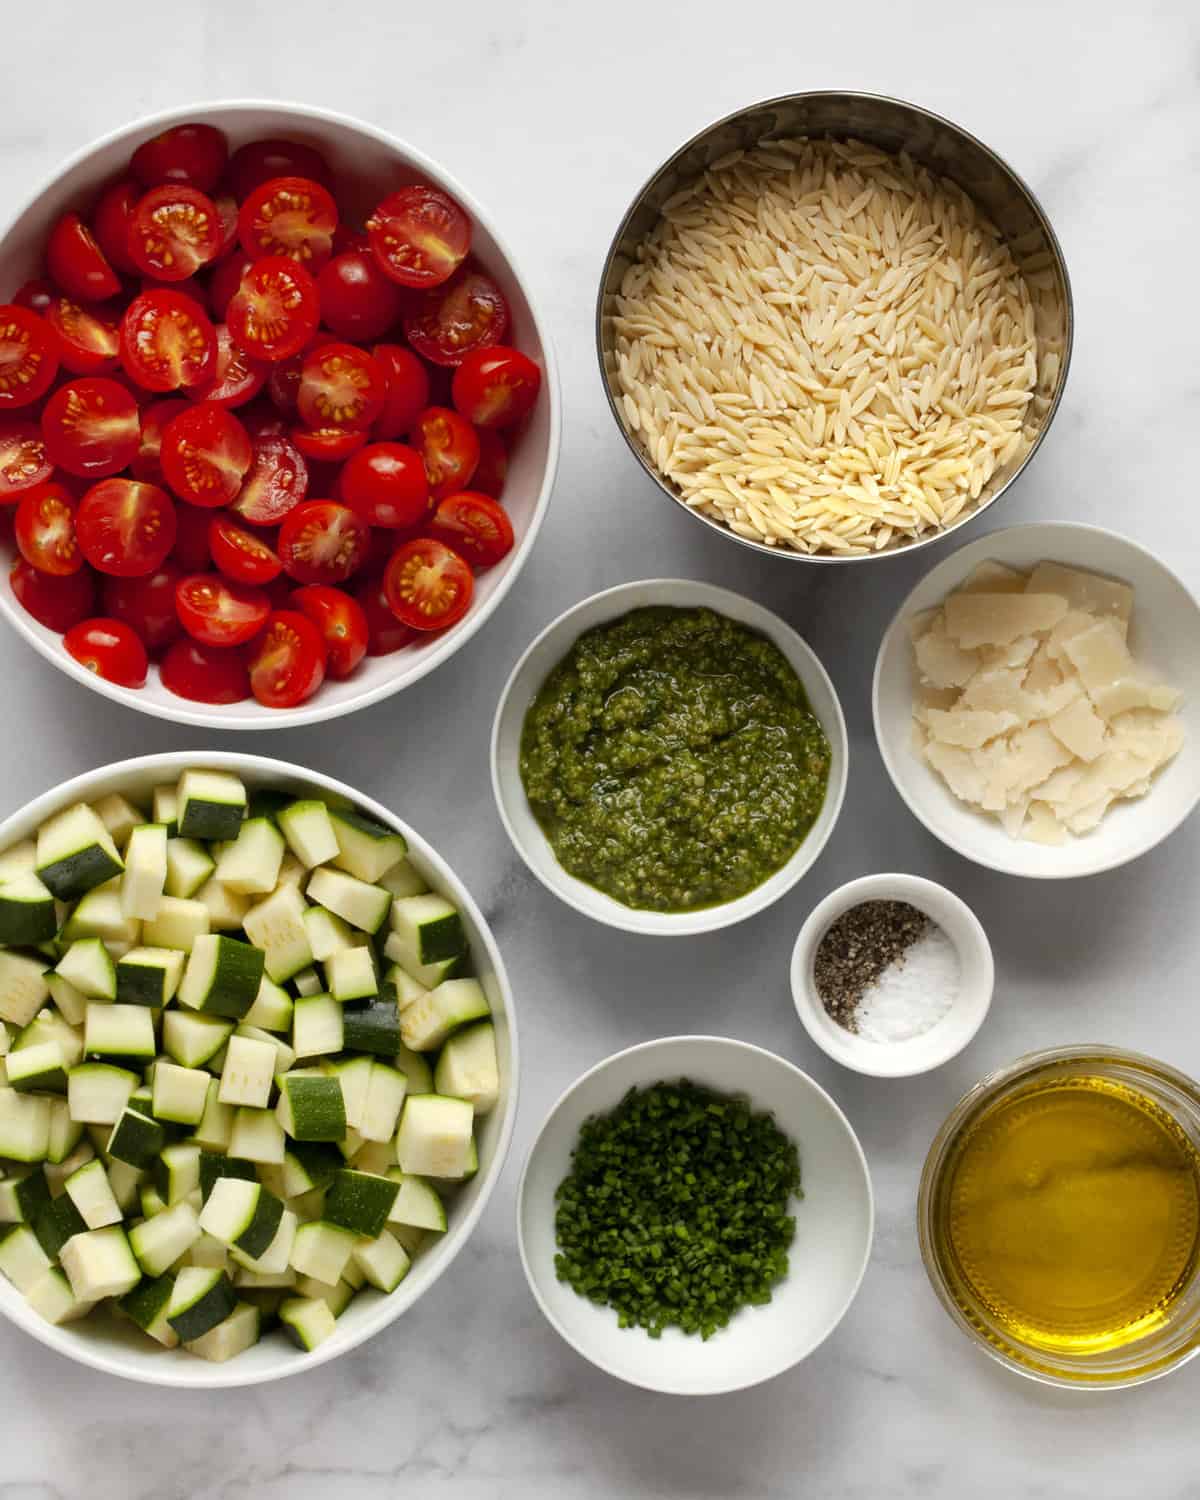 Ingredients including zucchini, tomatoes, orzo, pesto, parmesan, chives, olive oil, salt and pepper.